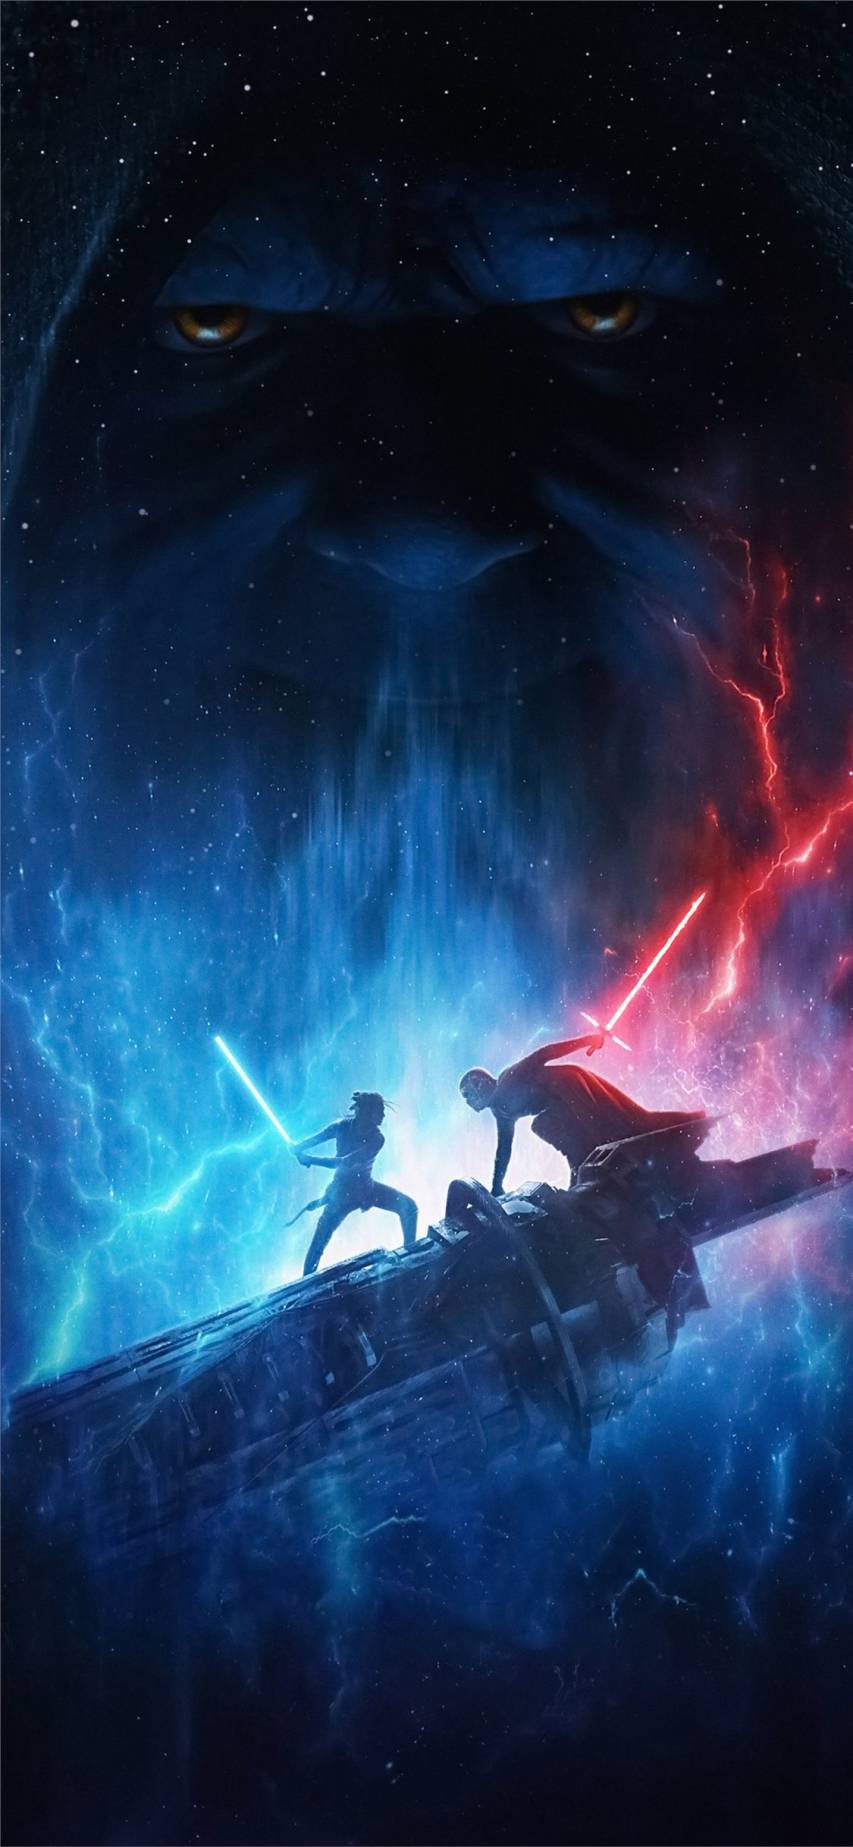 Popular Star Wars Wallpaper Pictures for iPhone